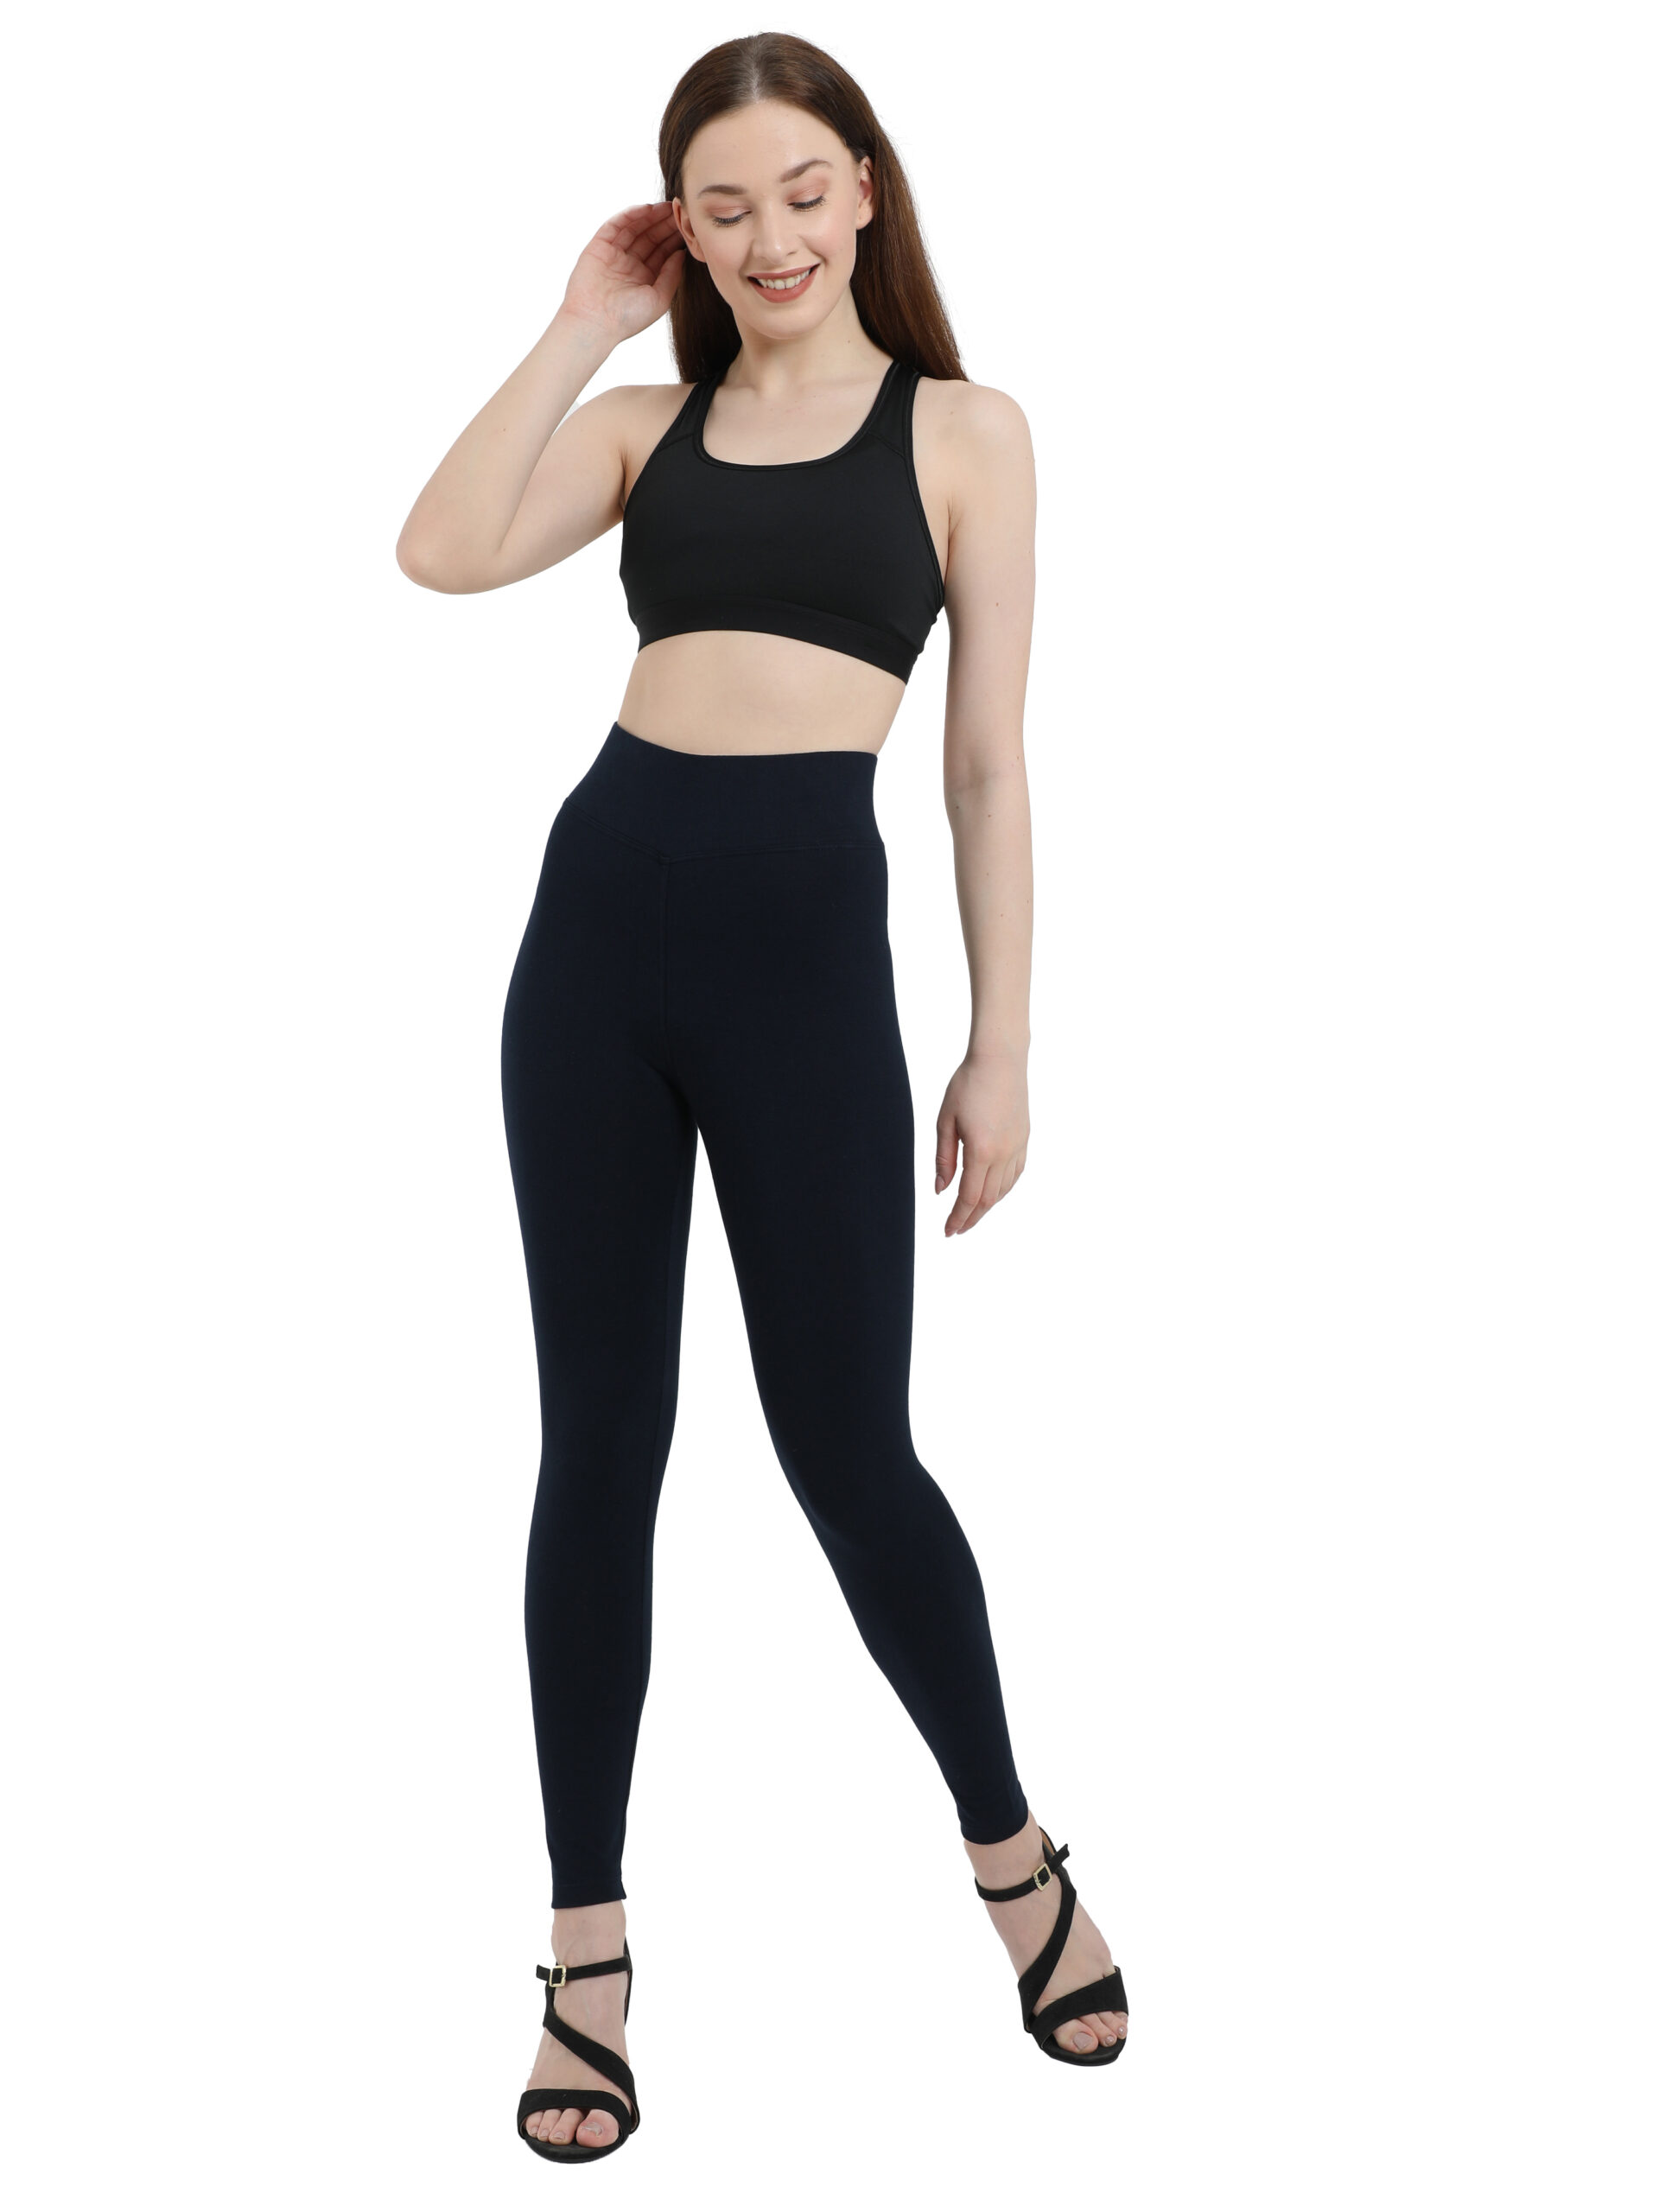 Discover more than 120 womens navy blue leggings